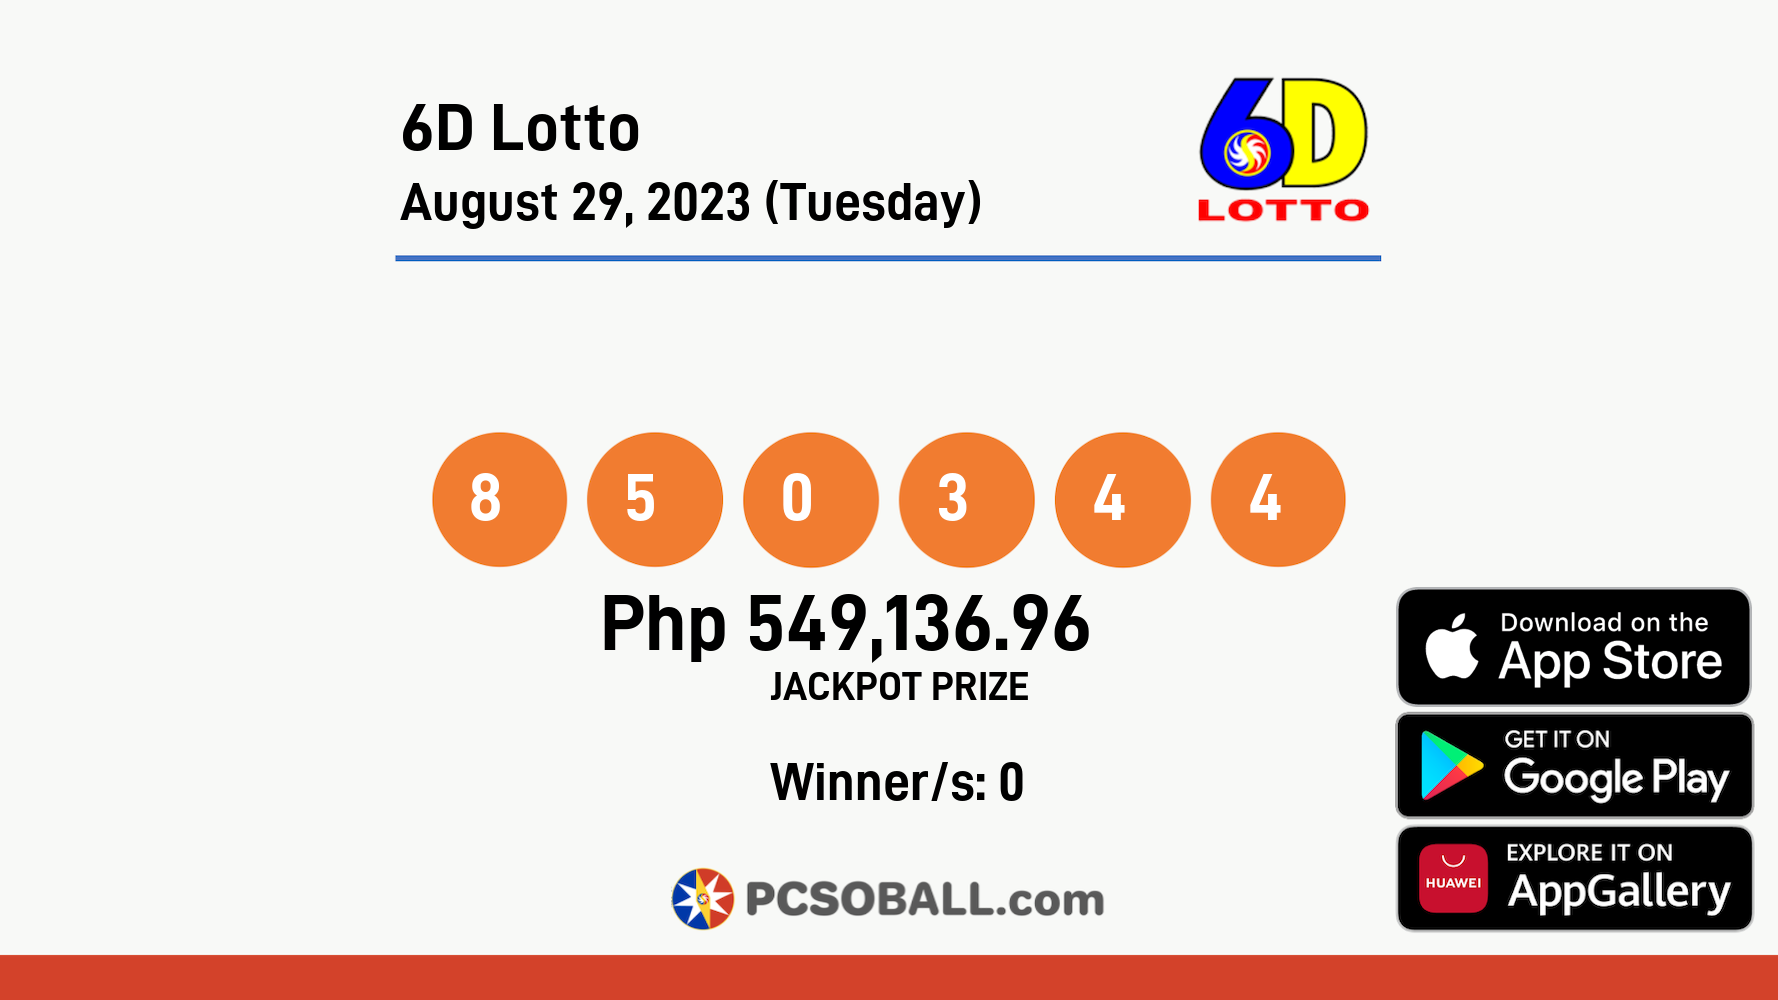 6D Lotto August 29, 2023 (Tuesday) Result